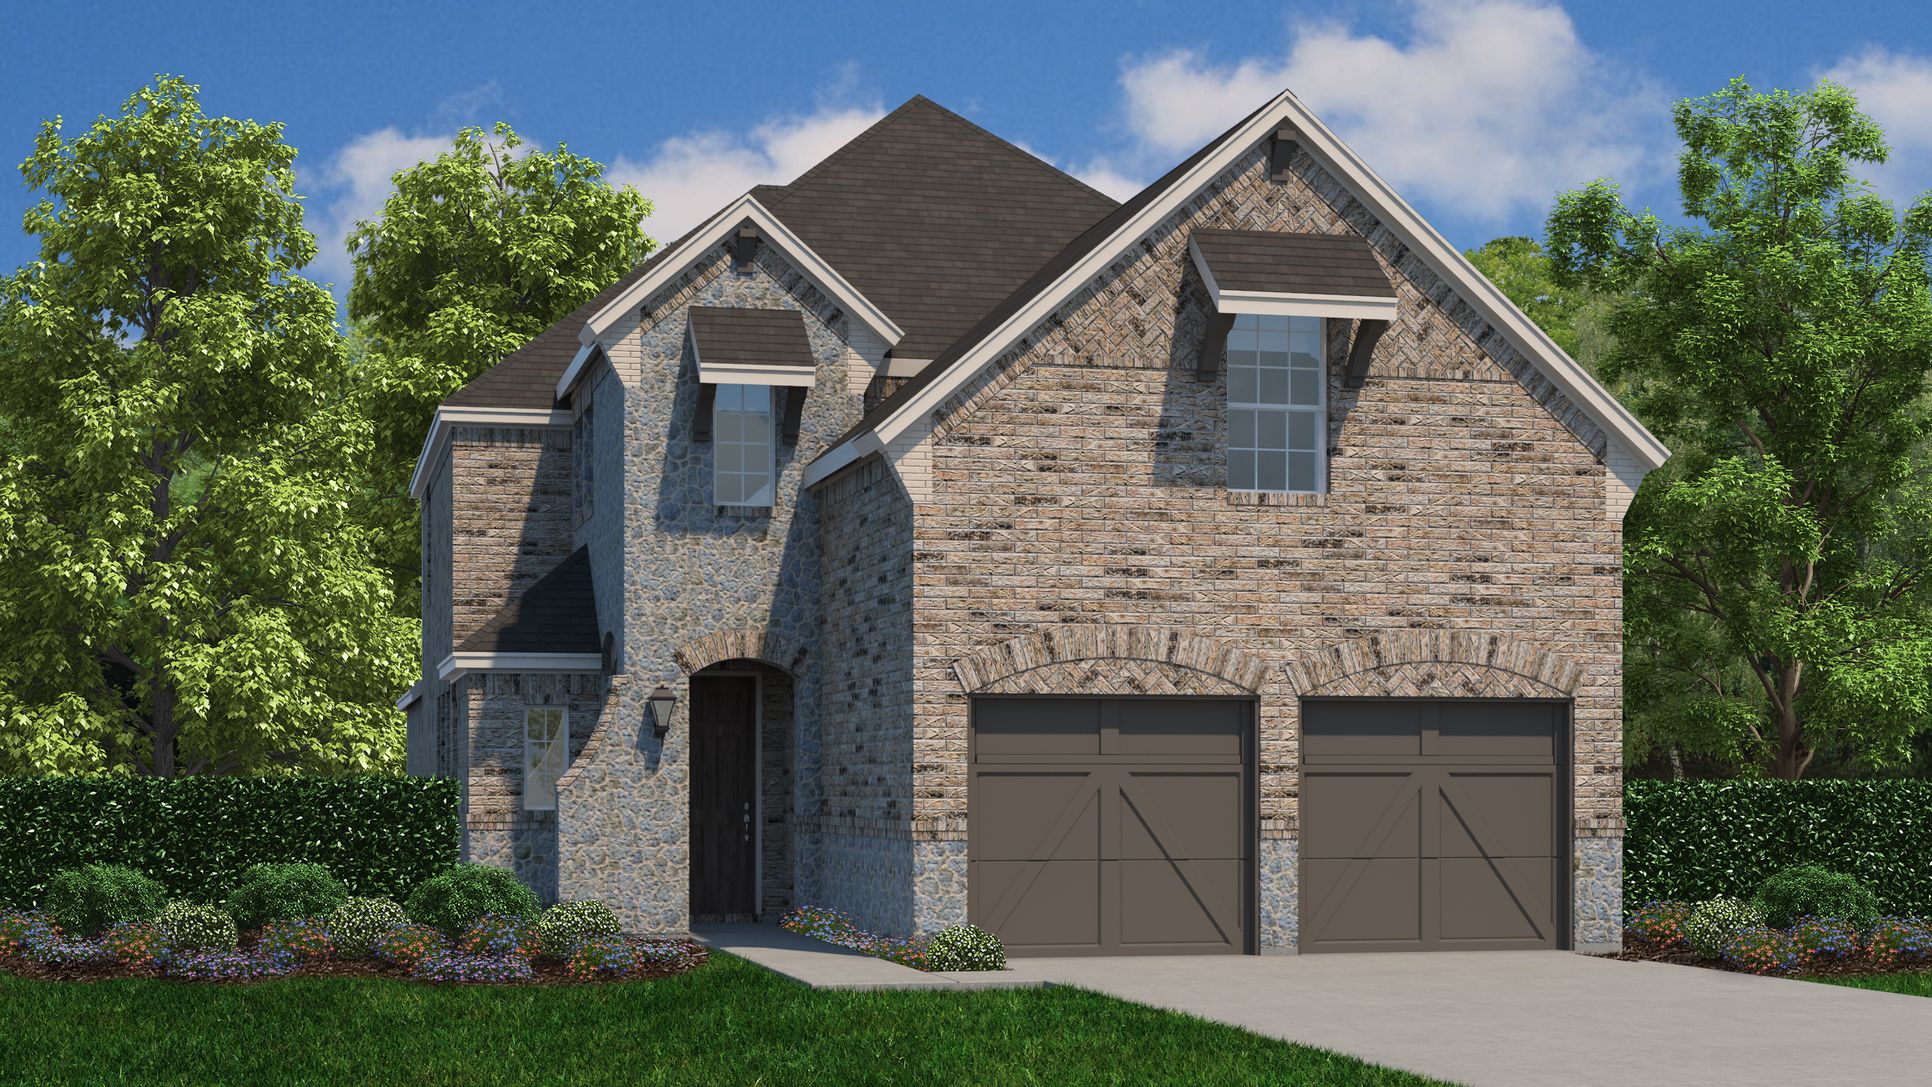 Exterior:Plan 1185 Elevation C with Stone